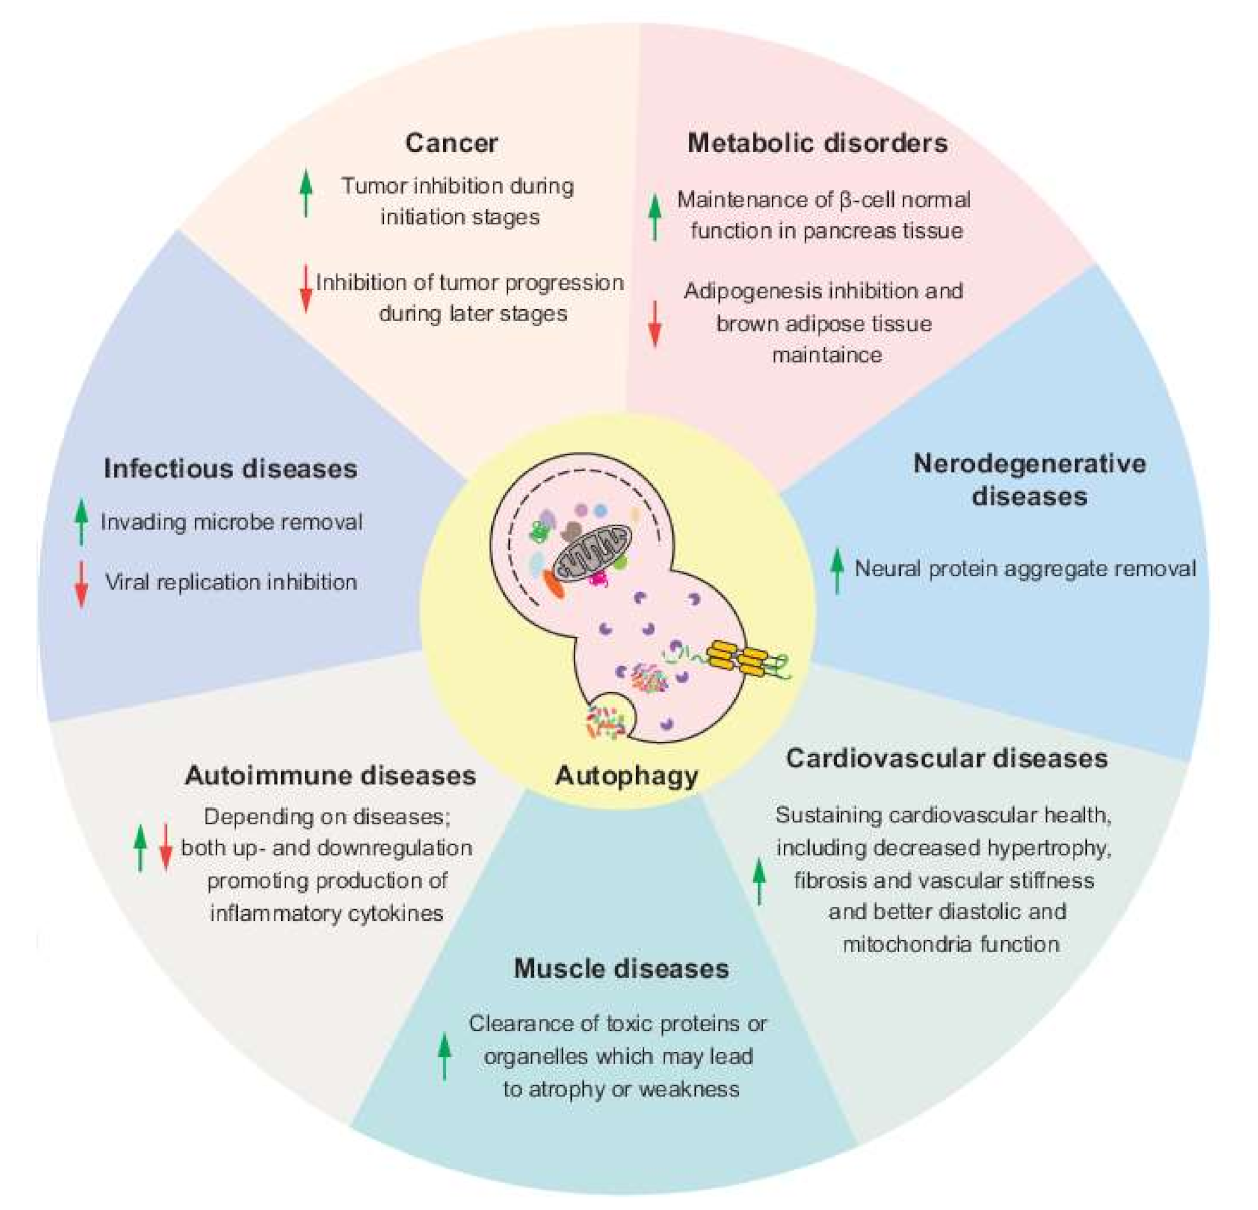 Autophagy and autophagy-related diseases